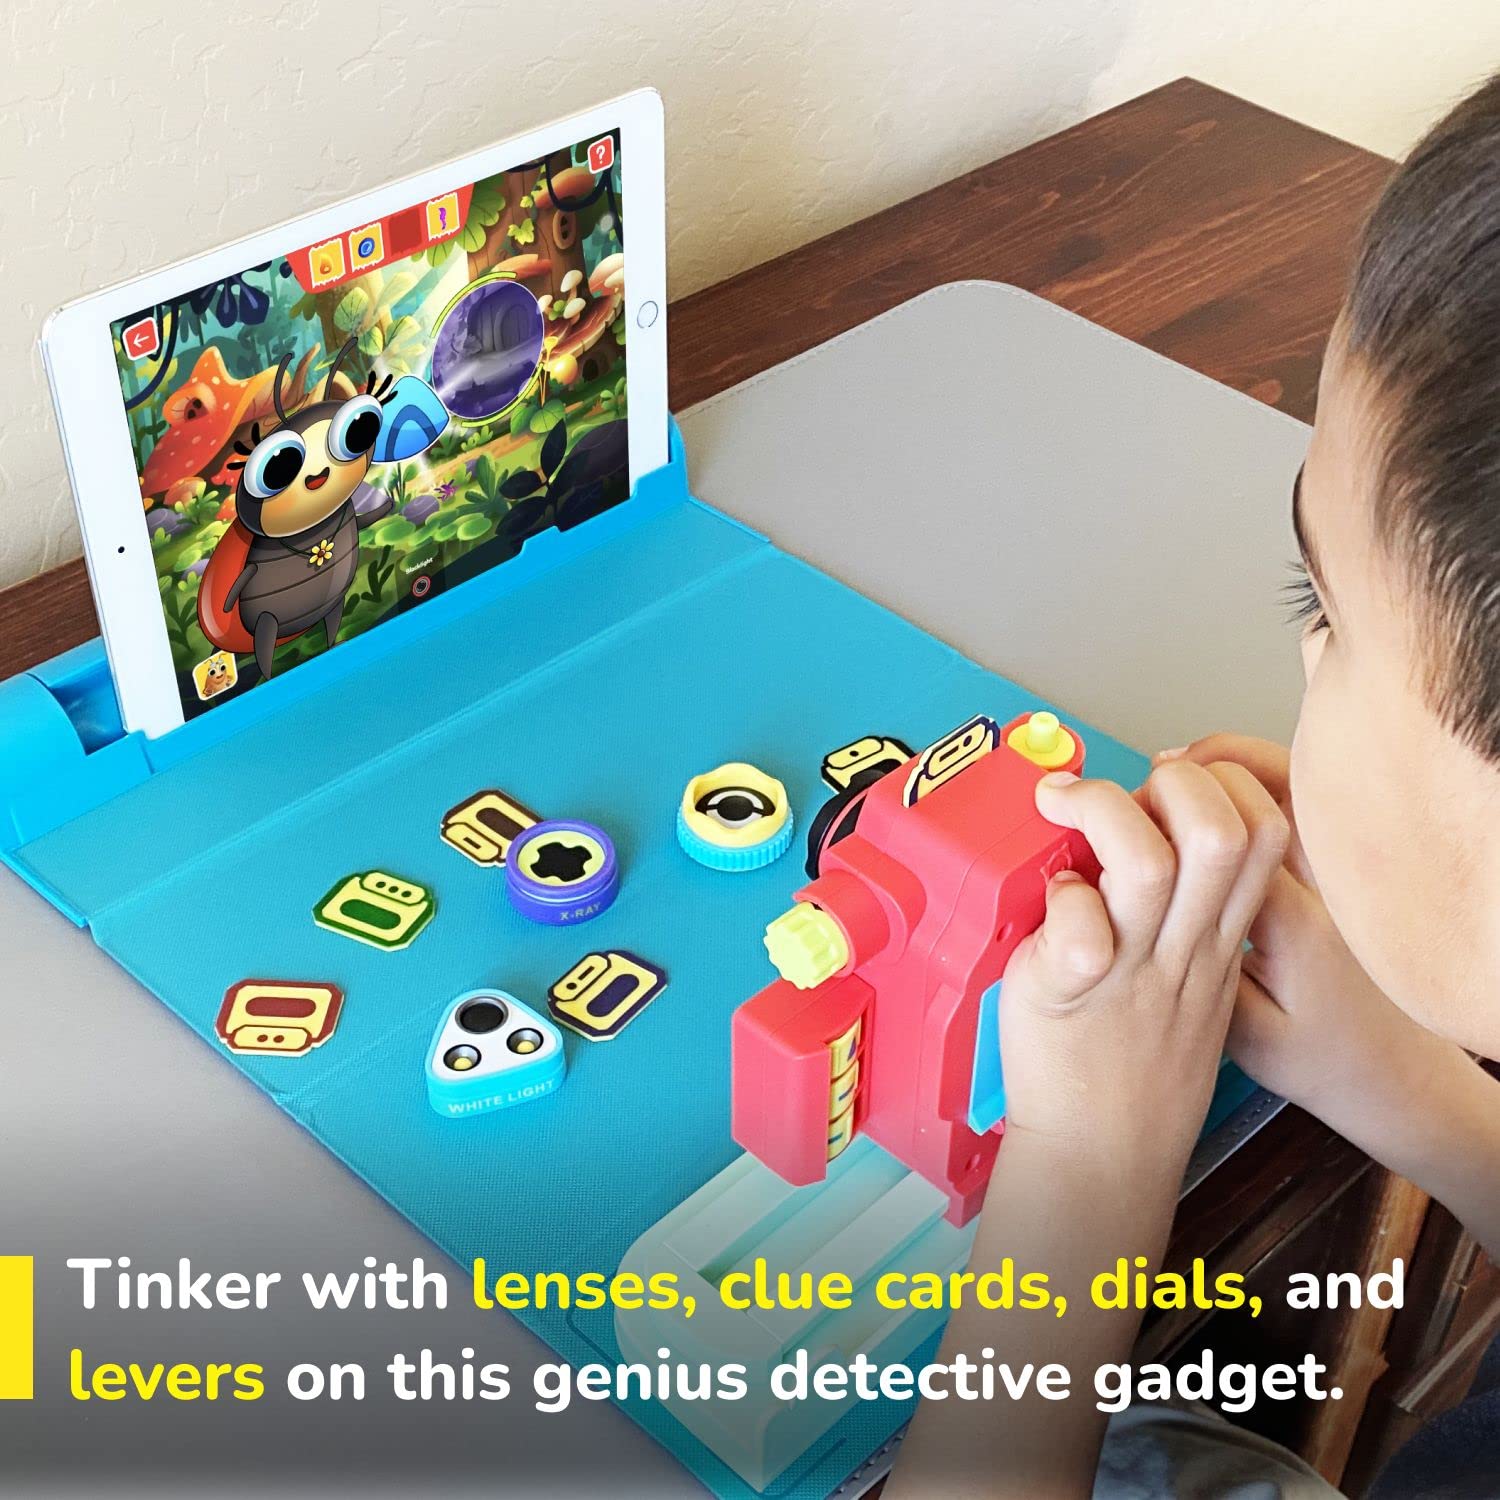 PlayShifu Plugo Detective - Interactive STEM Spy Kit for Kids Ages 4 Years & Up (App Based, Device Not Included)